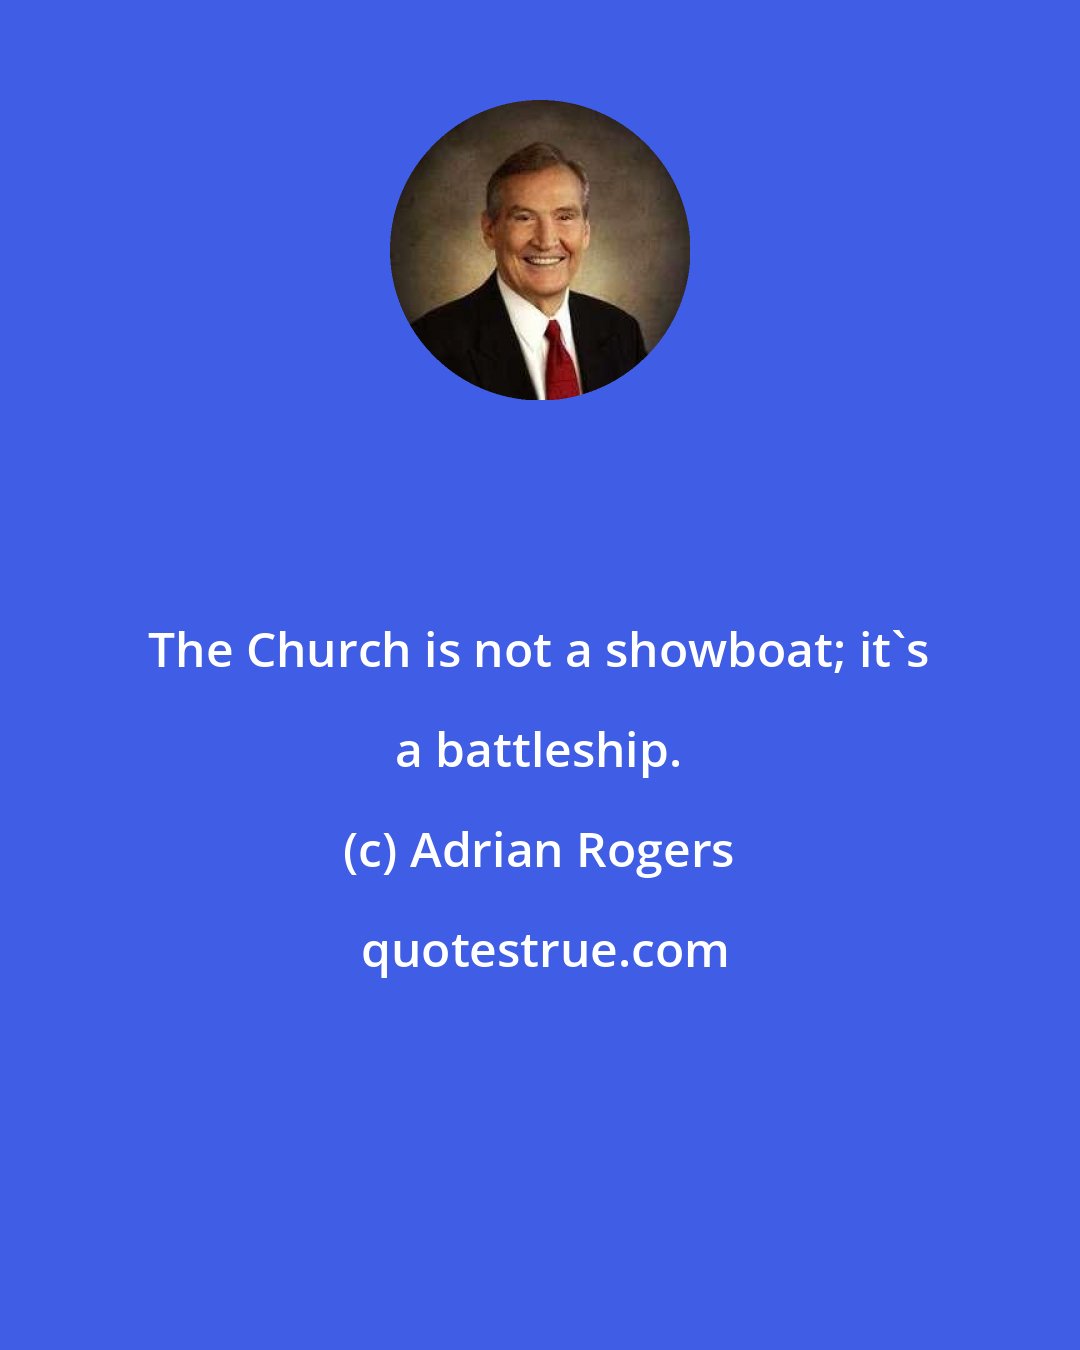 Adrian Rogers: The Church is not a showboat; it's a battleship.